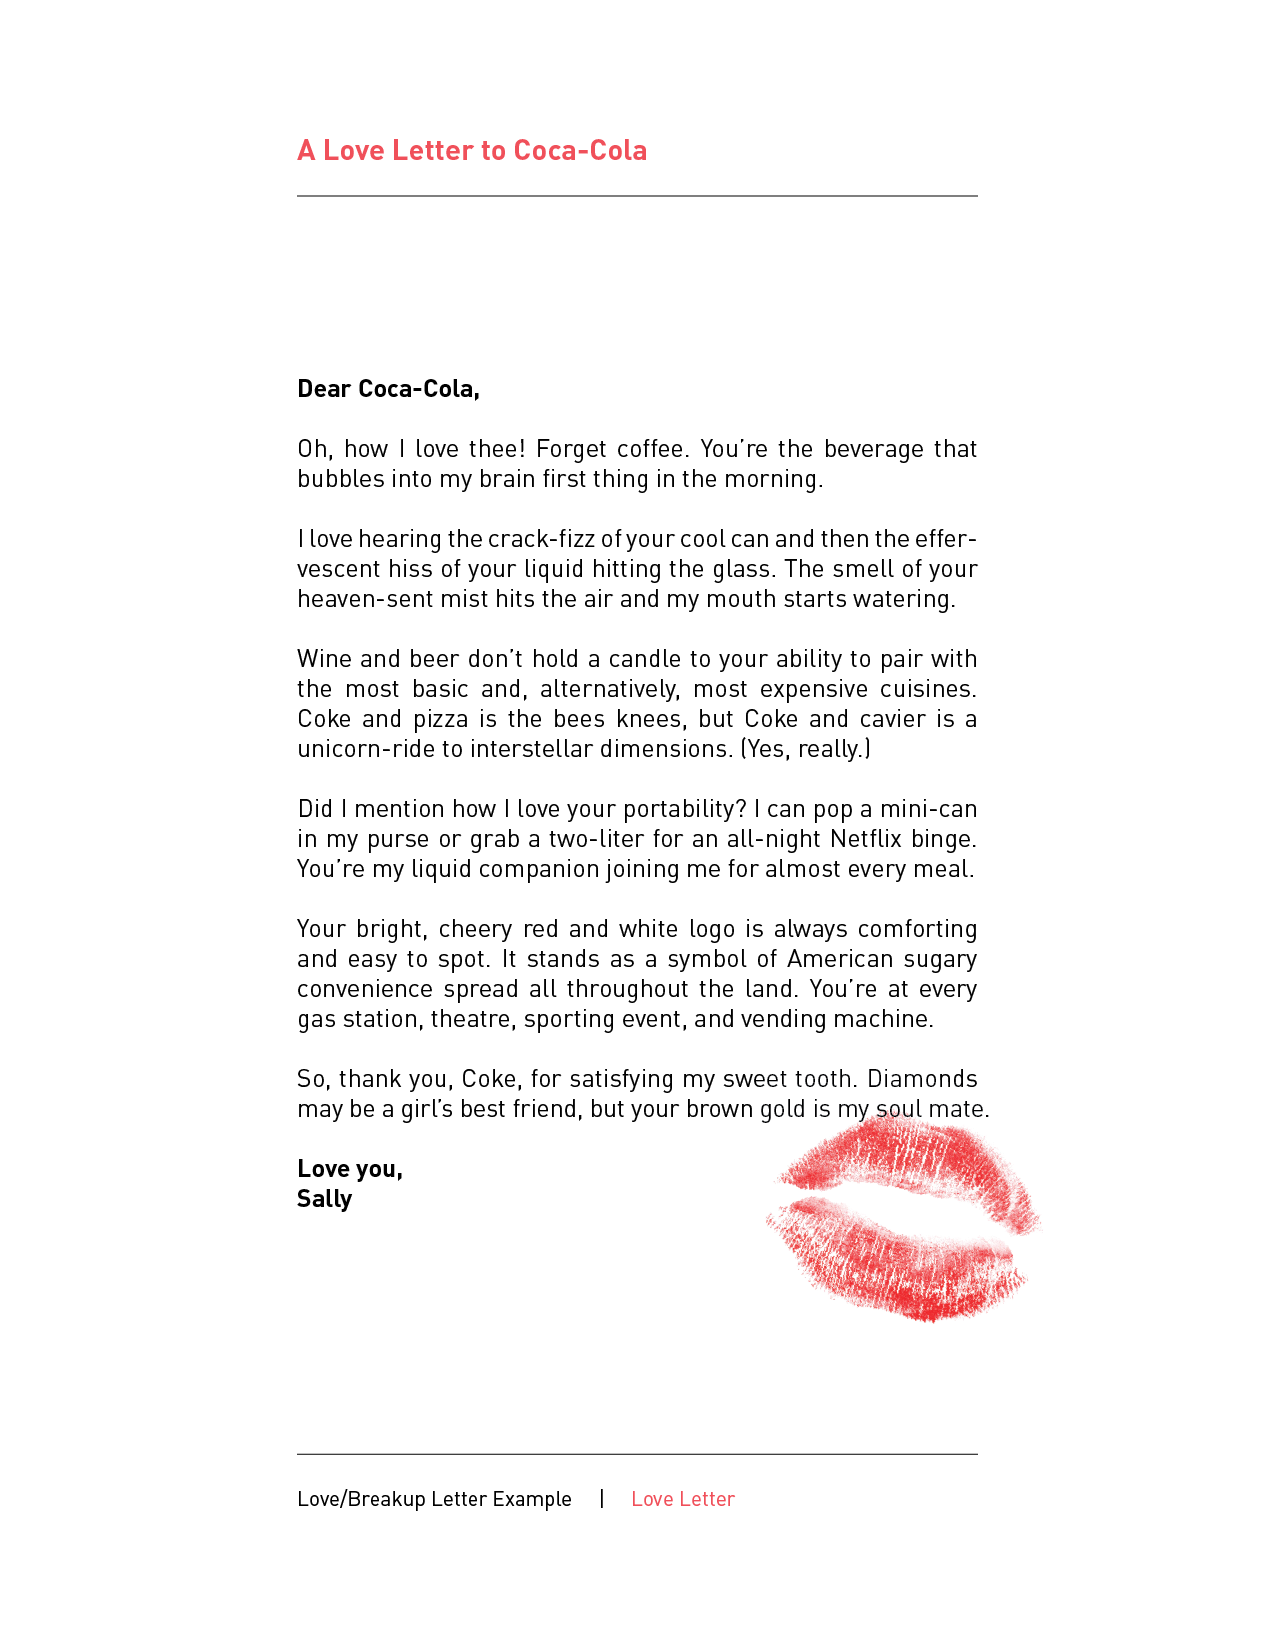 Design Thinking Activity #1 – The Love/Breakup Letter